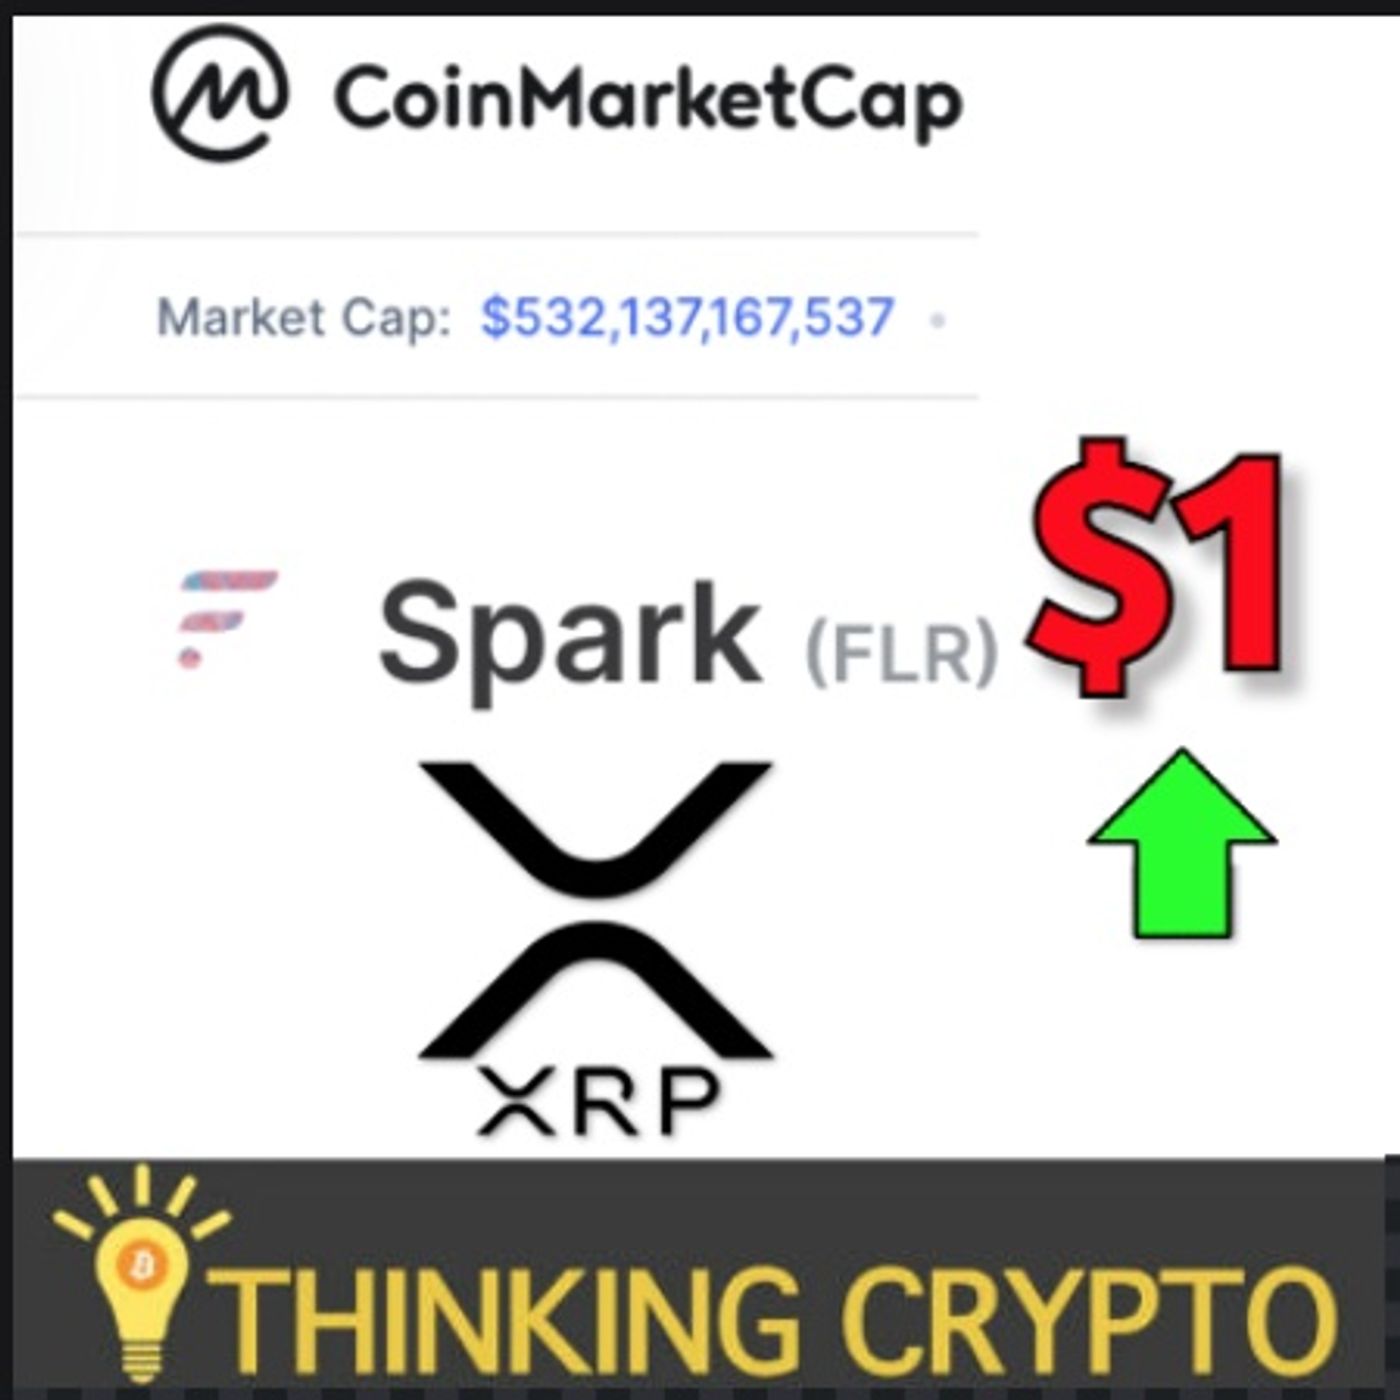 Will The RIPPLE XRP Fork Spark Token Value Be $1 ...